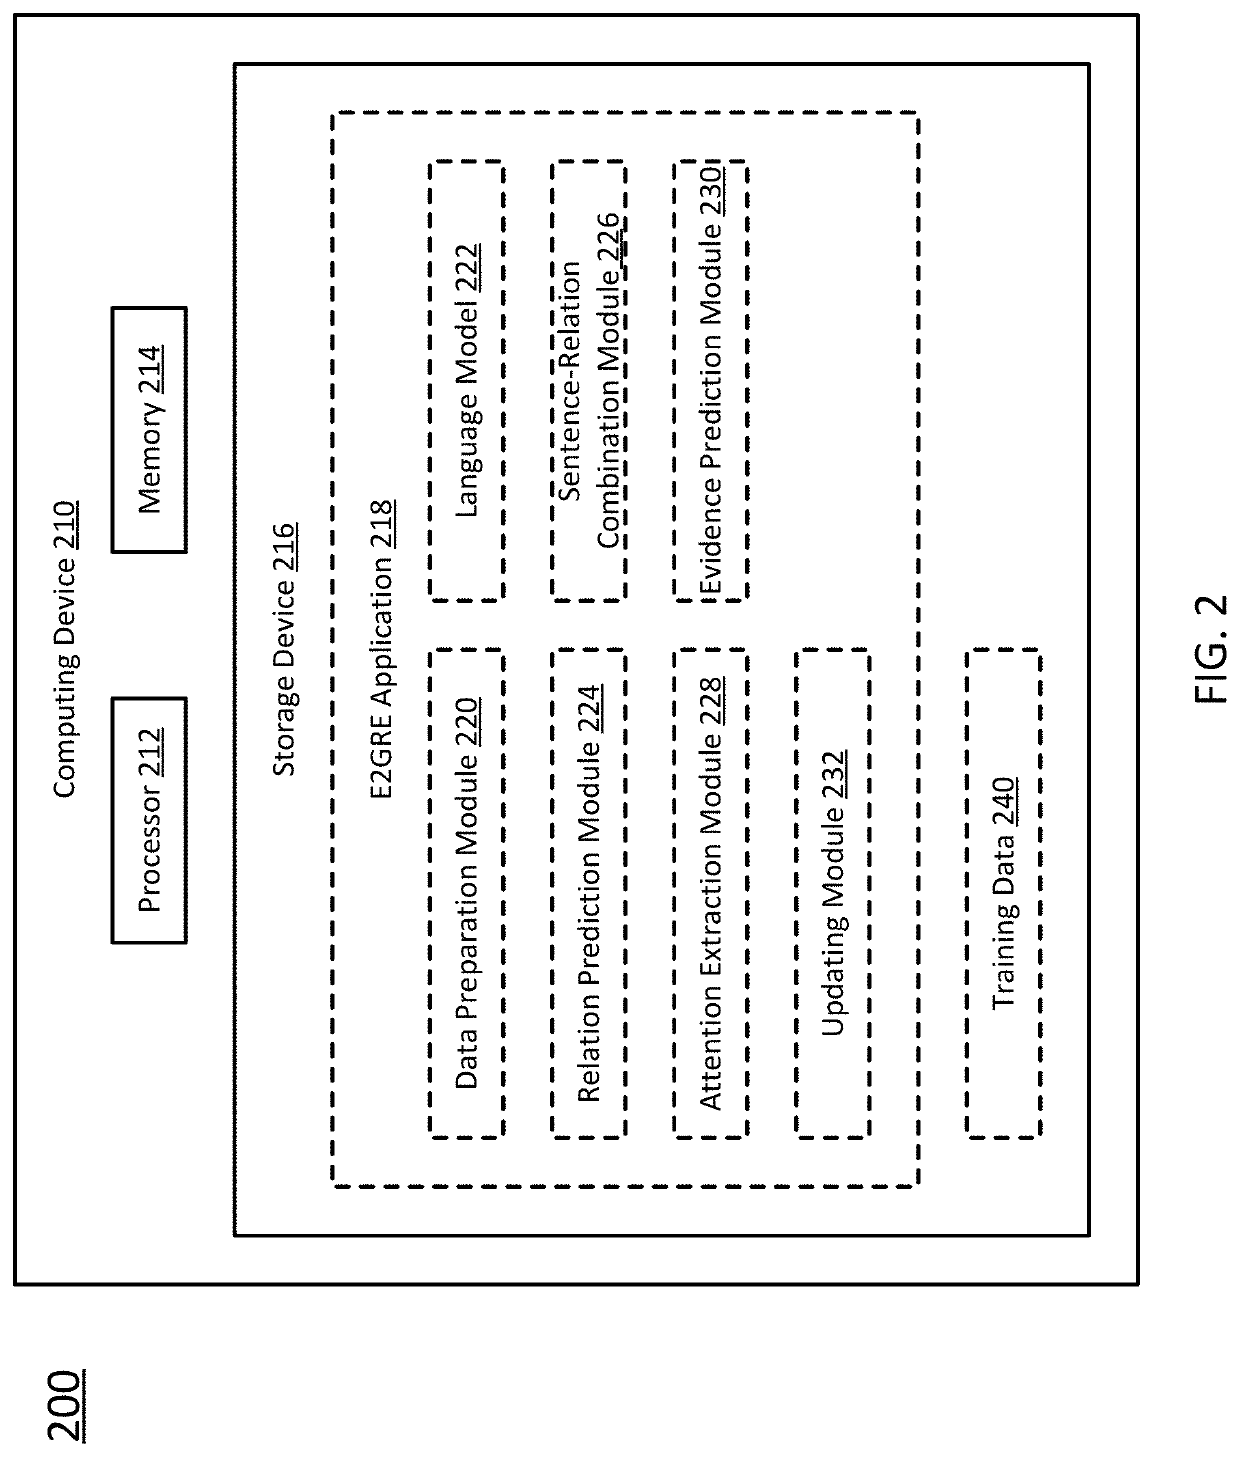 System for entity and evidence-guided relation prediction and method of using the same